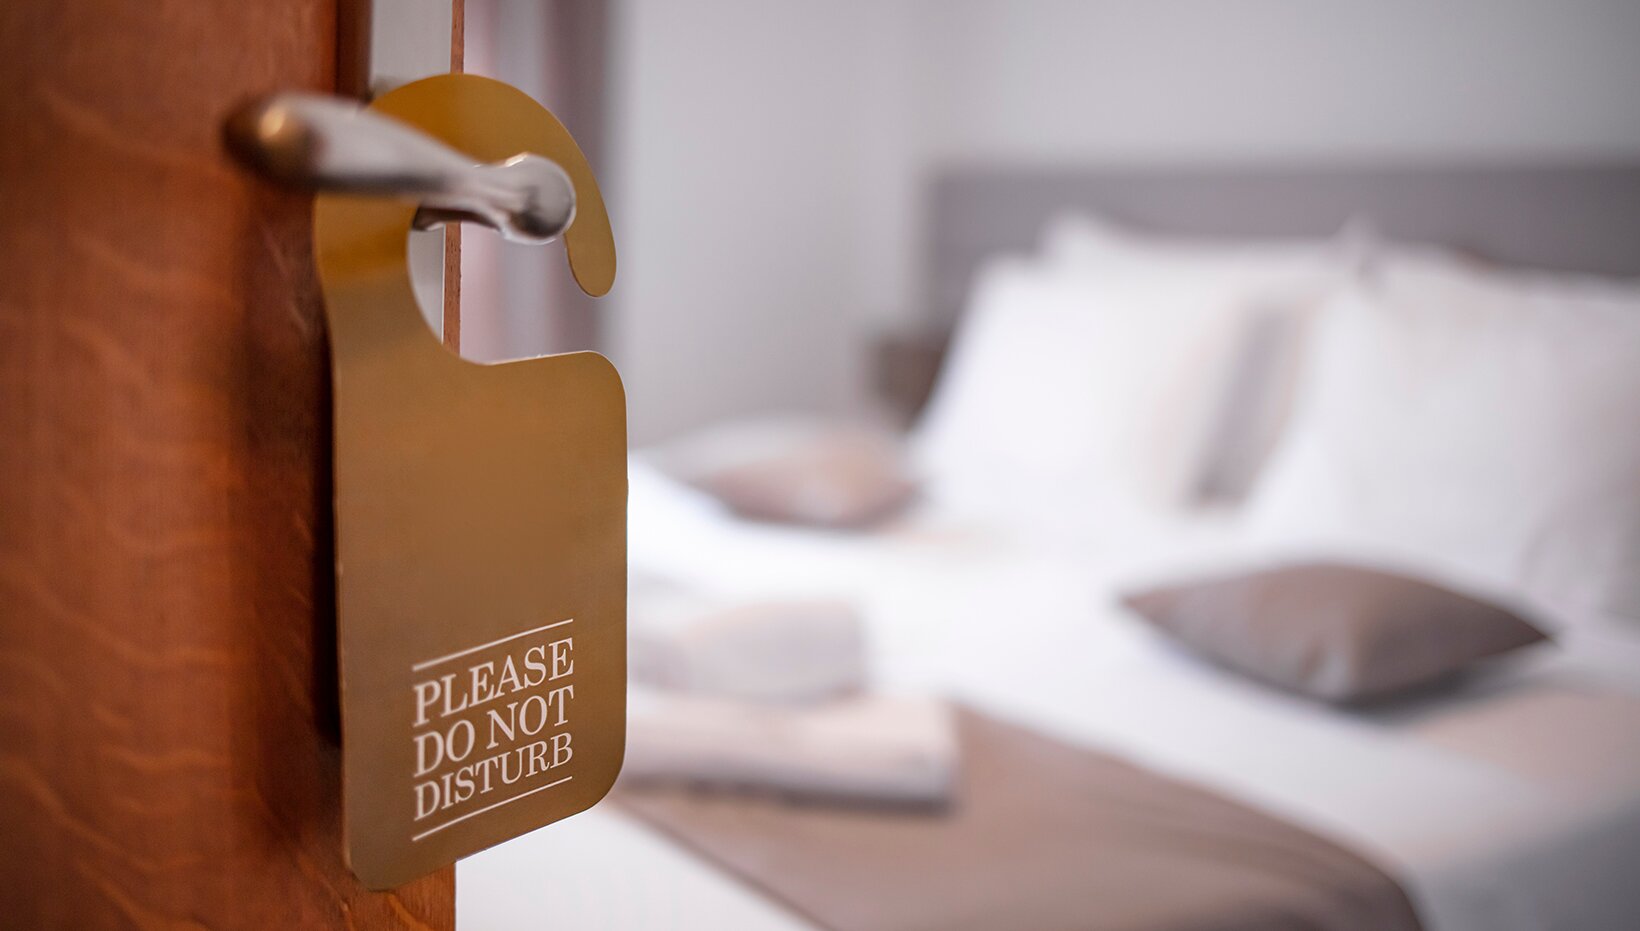 Investment in UK hotels at lowest level since 2012